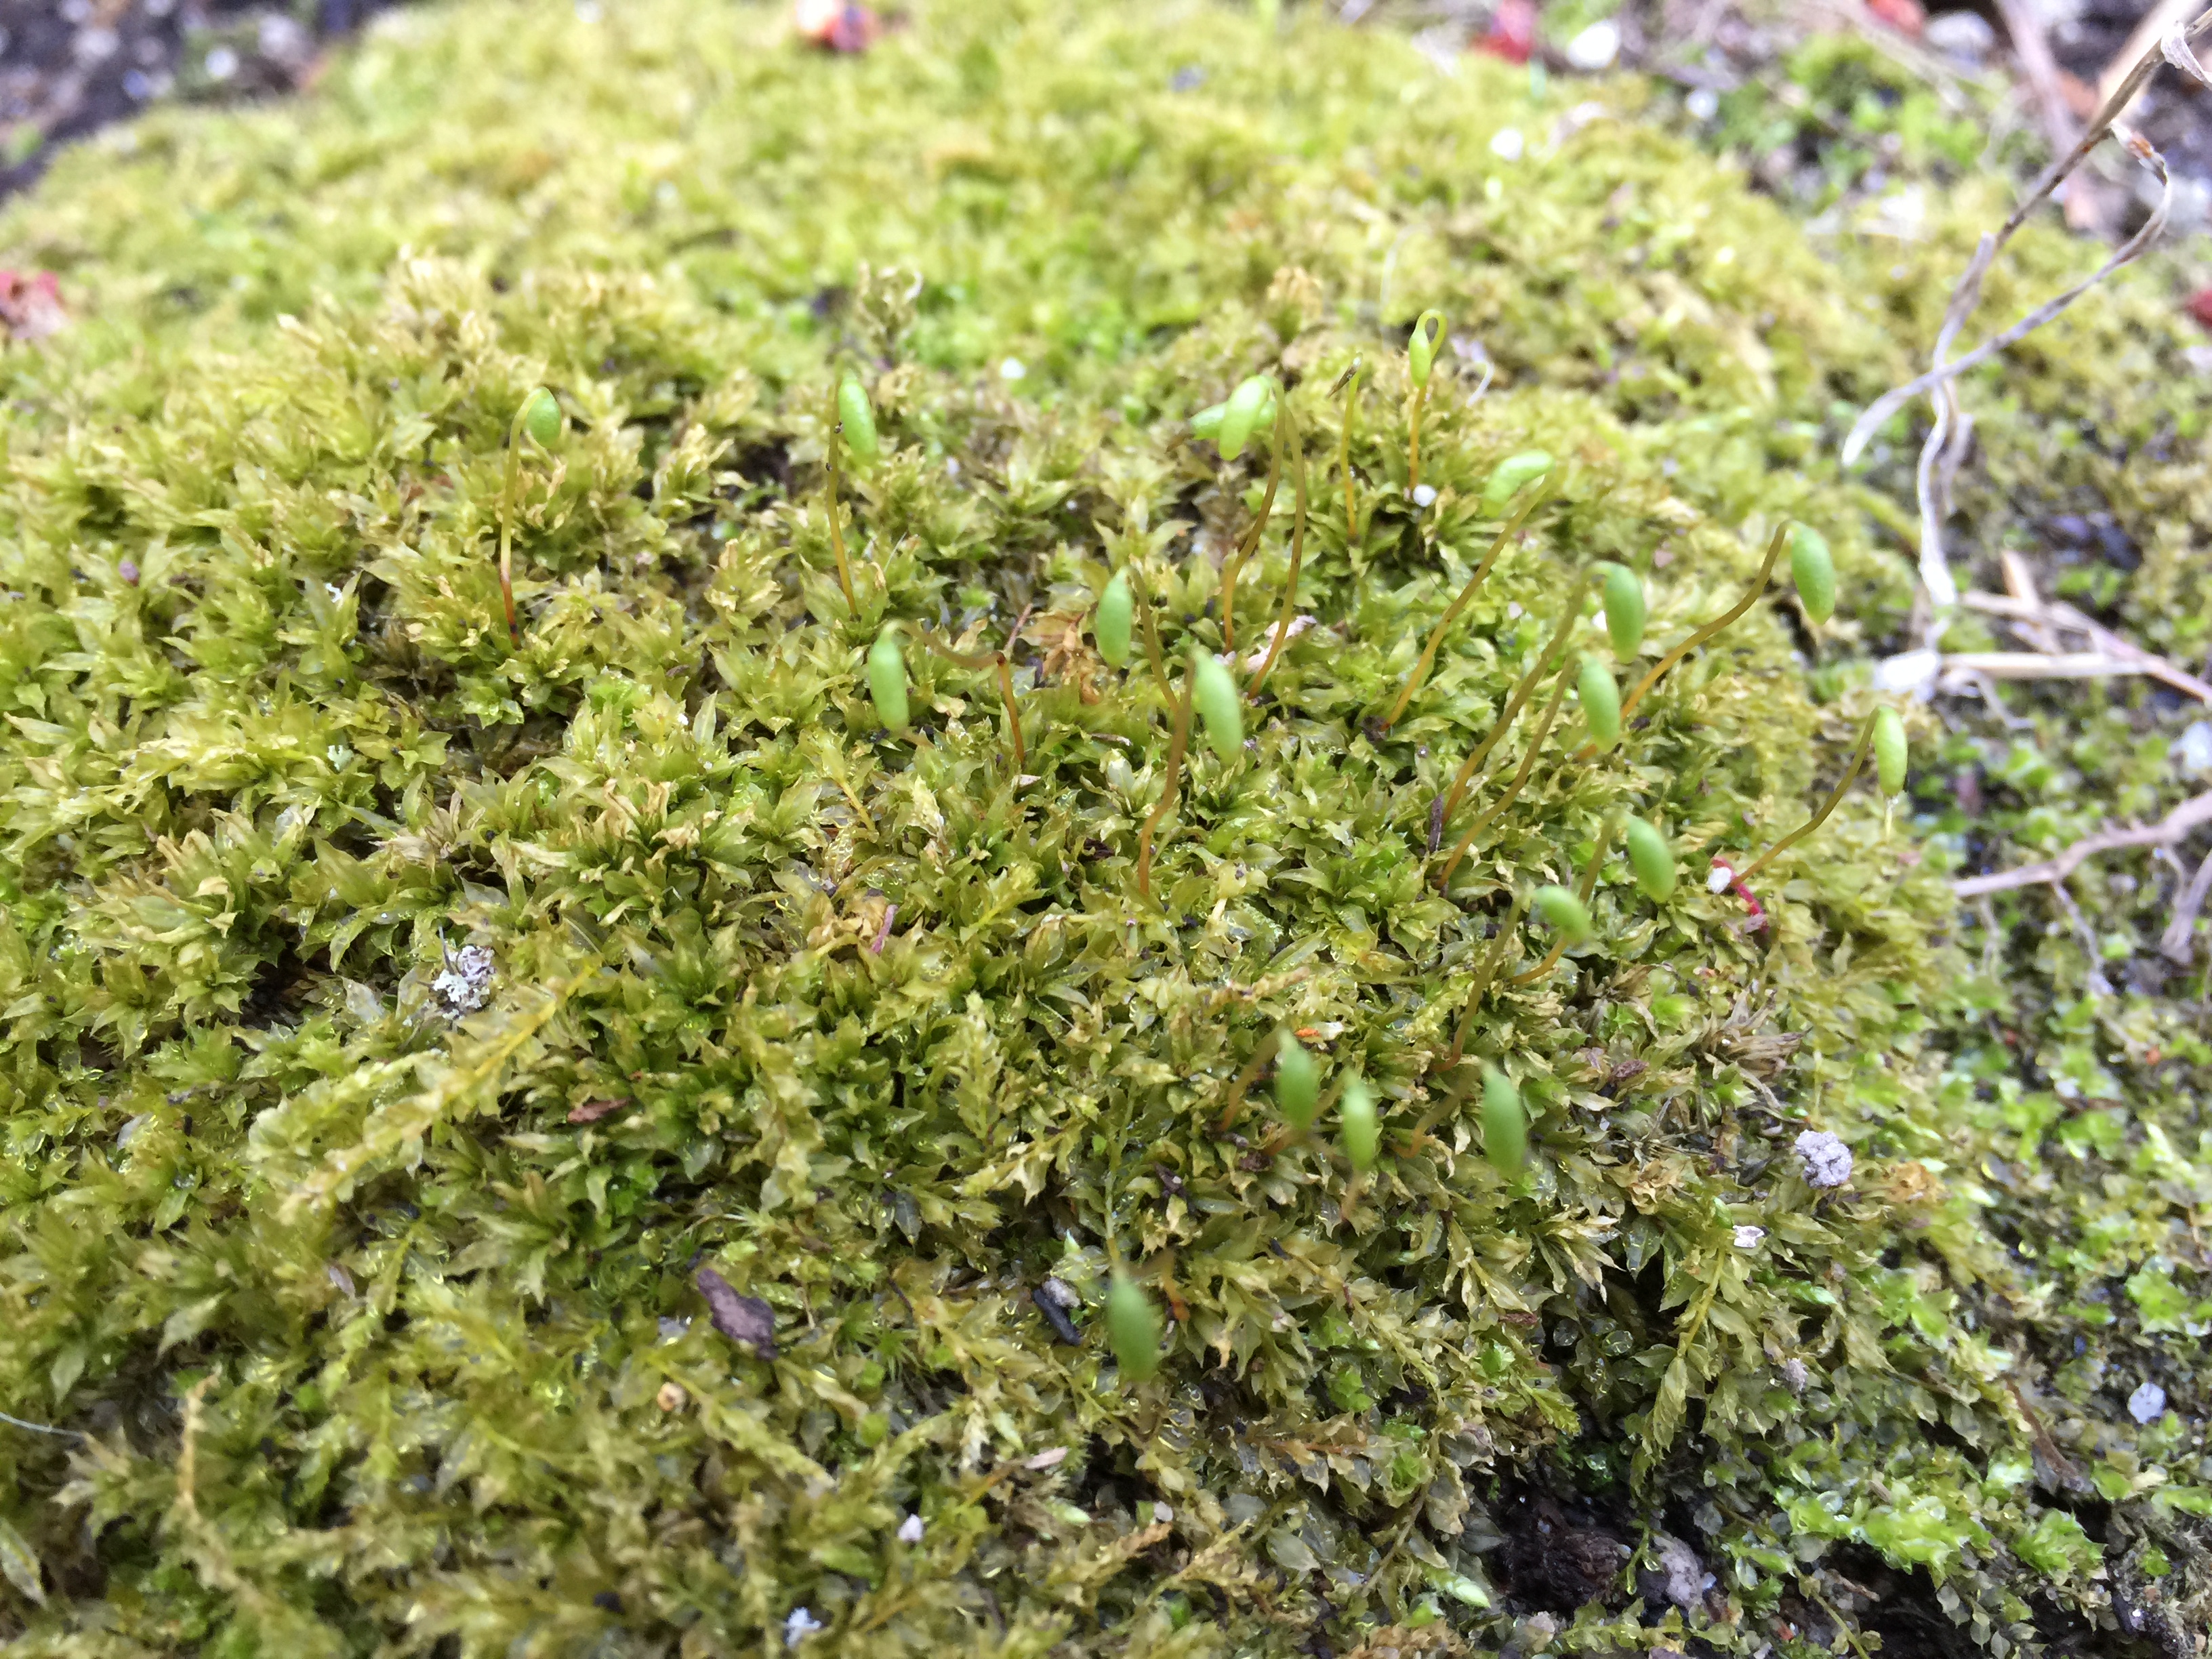 A moss showing both gametophytes (the low, leaf-like forms) and sporophytes (the tall, stalk-like forms).